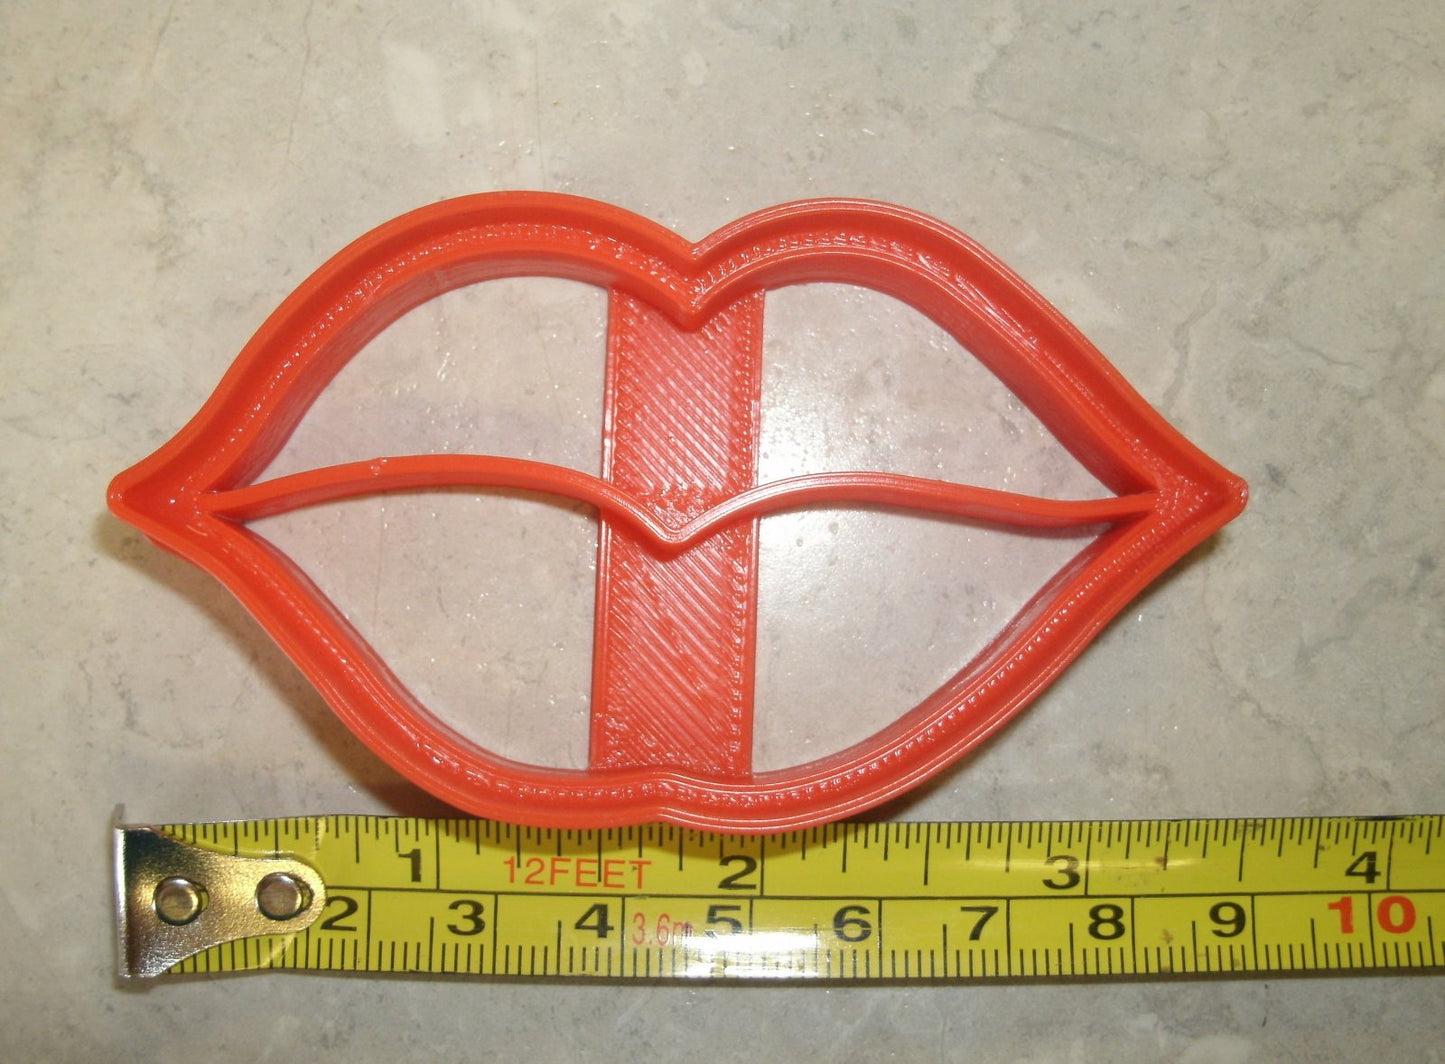 Lips Kiss Mouth Lipstick Cookie Cutter Made in USA PR815